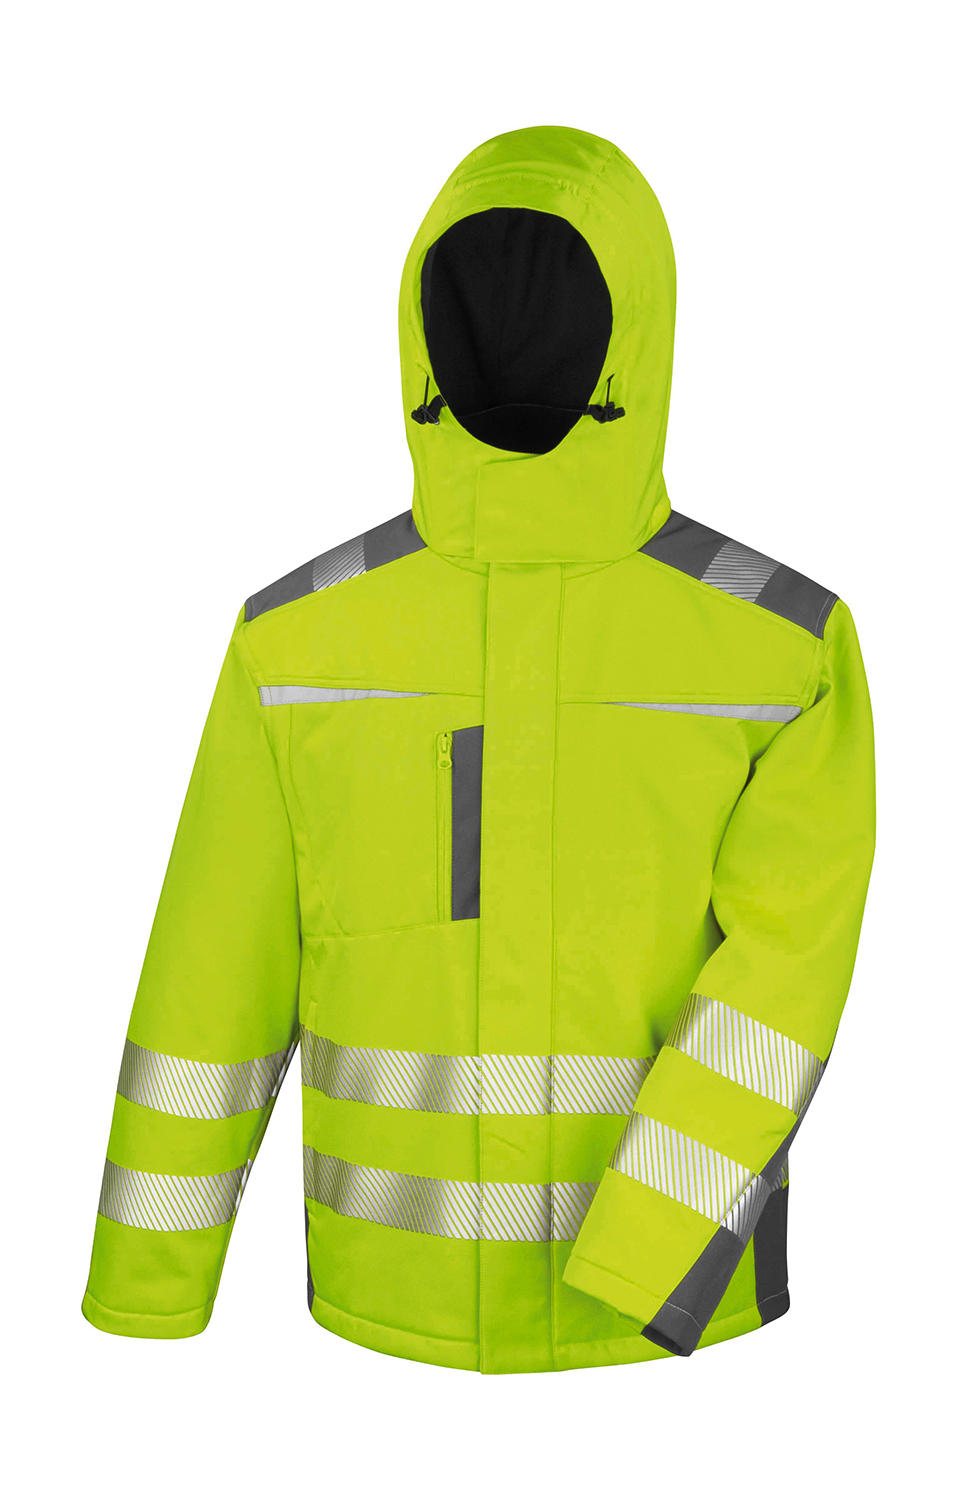  Dynamic SoftShell Coat in Farbe Fluorescent Yellow